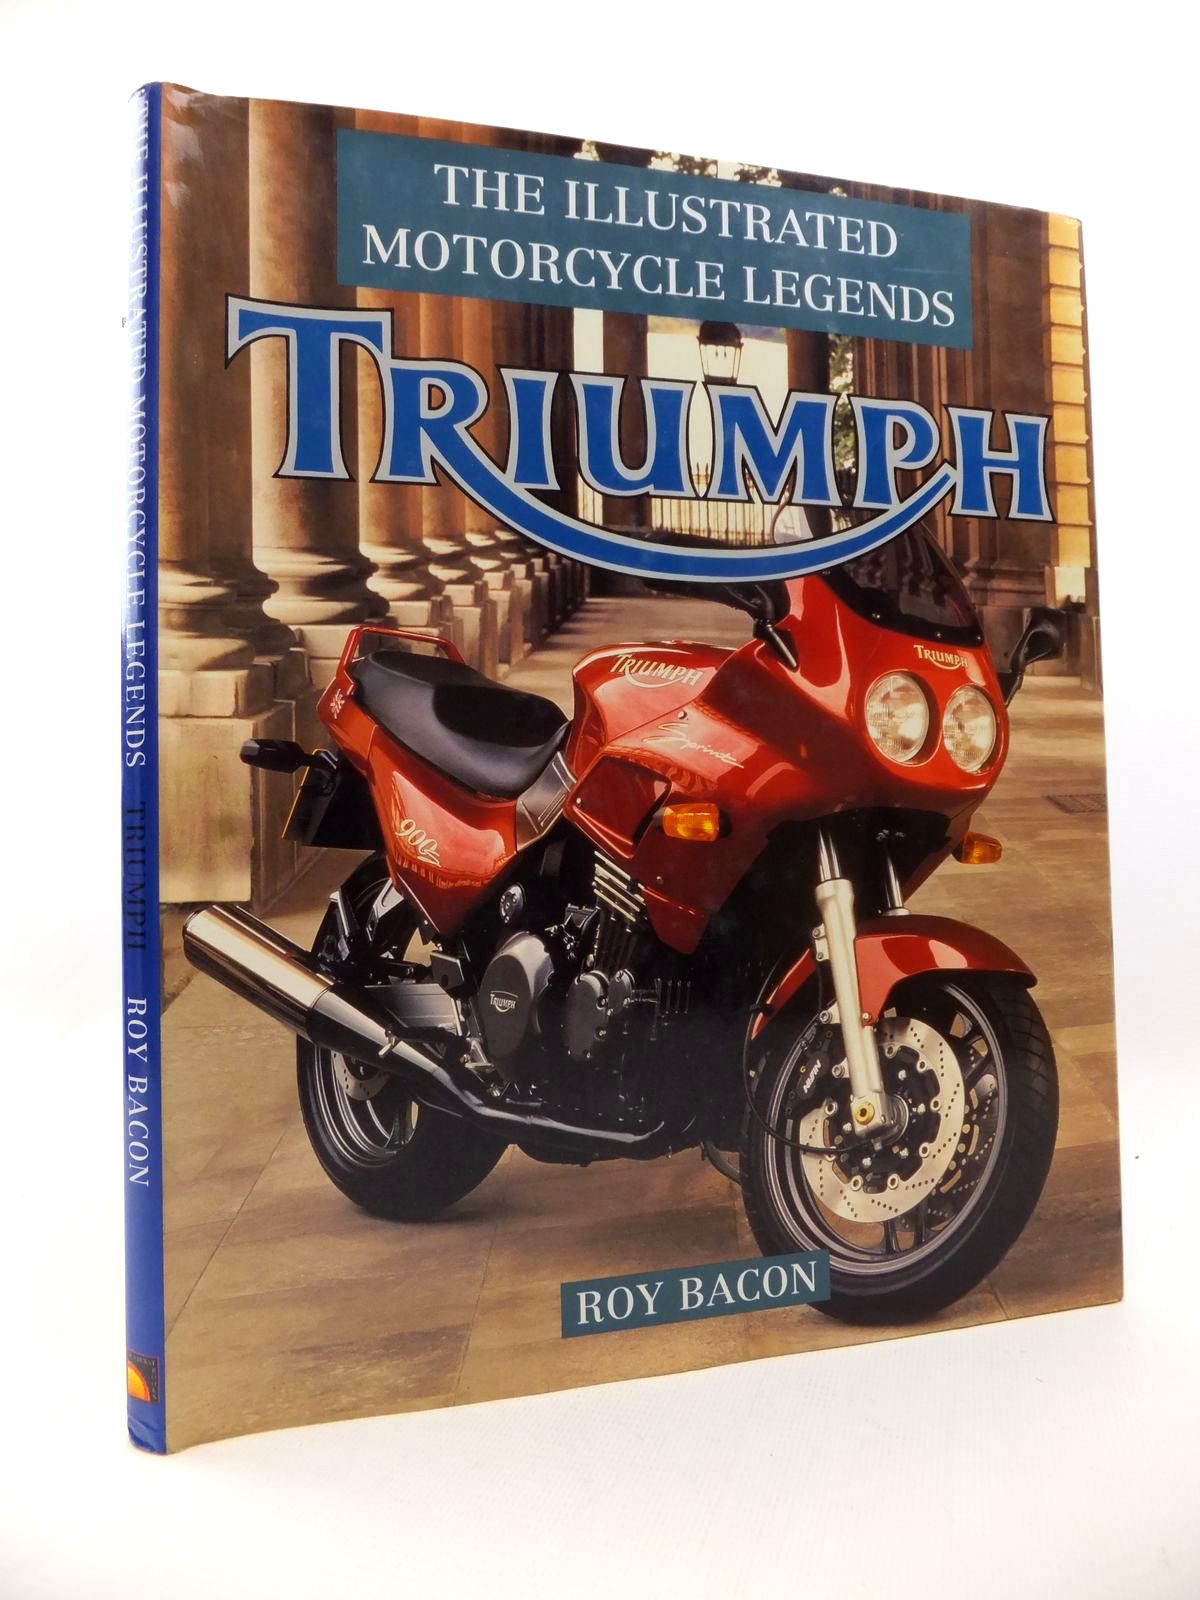 Photo of THE ILLUSTRATED MOTORCYCLE LEGENDS TRIUMPH written by Bacon, Roy published by Sunburst Books (STOCK CODE: 1813142)  for sale by Stella & Rose's Books